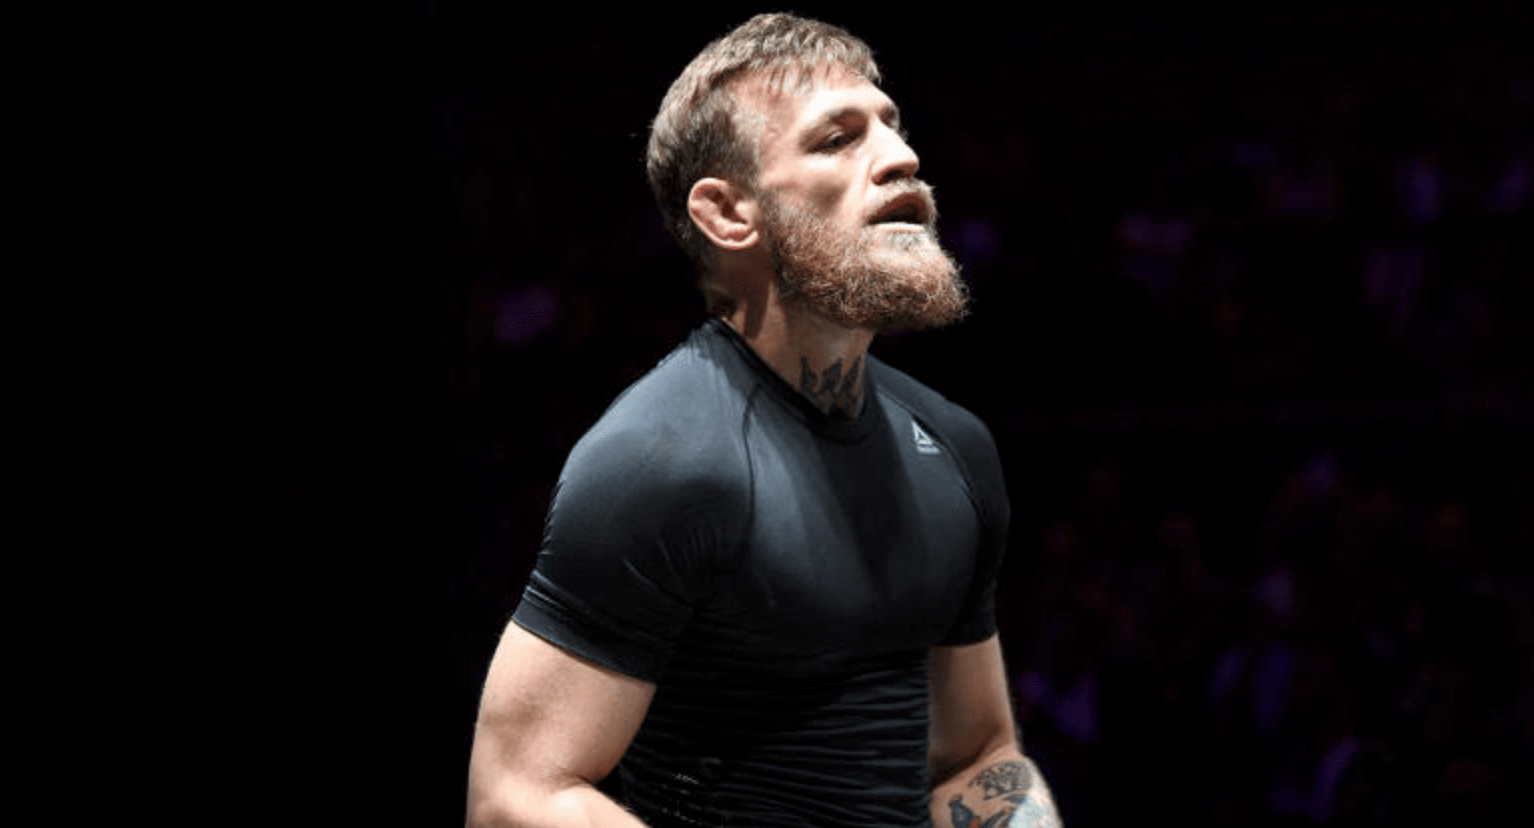 Conor McGregor: We’re Very Close To Announcing My Return